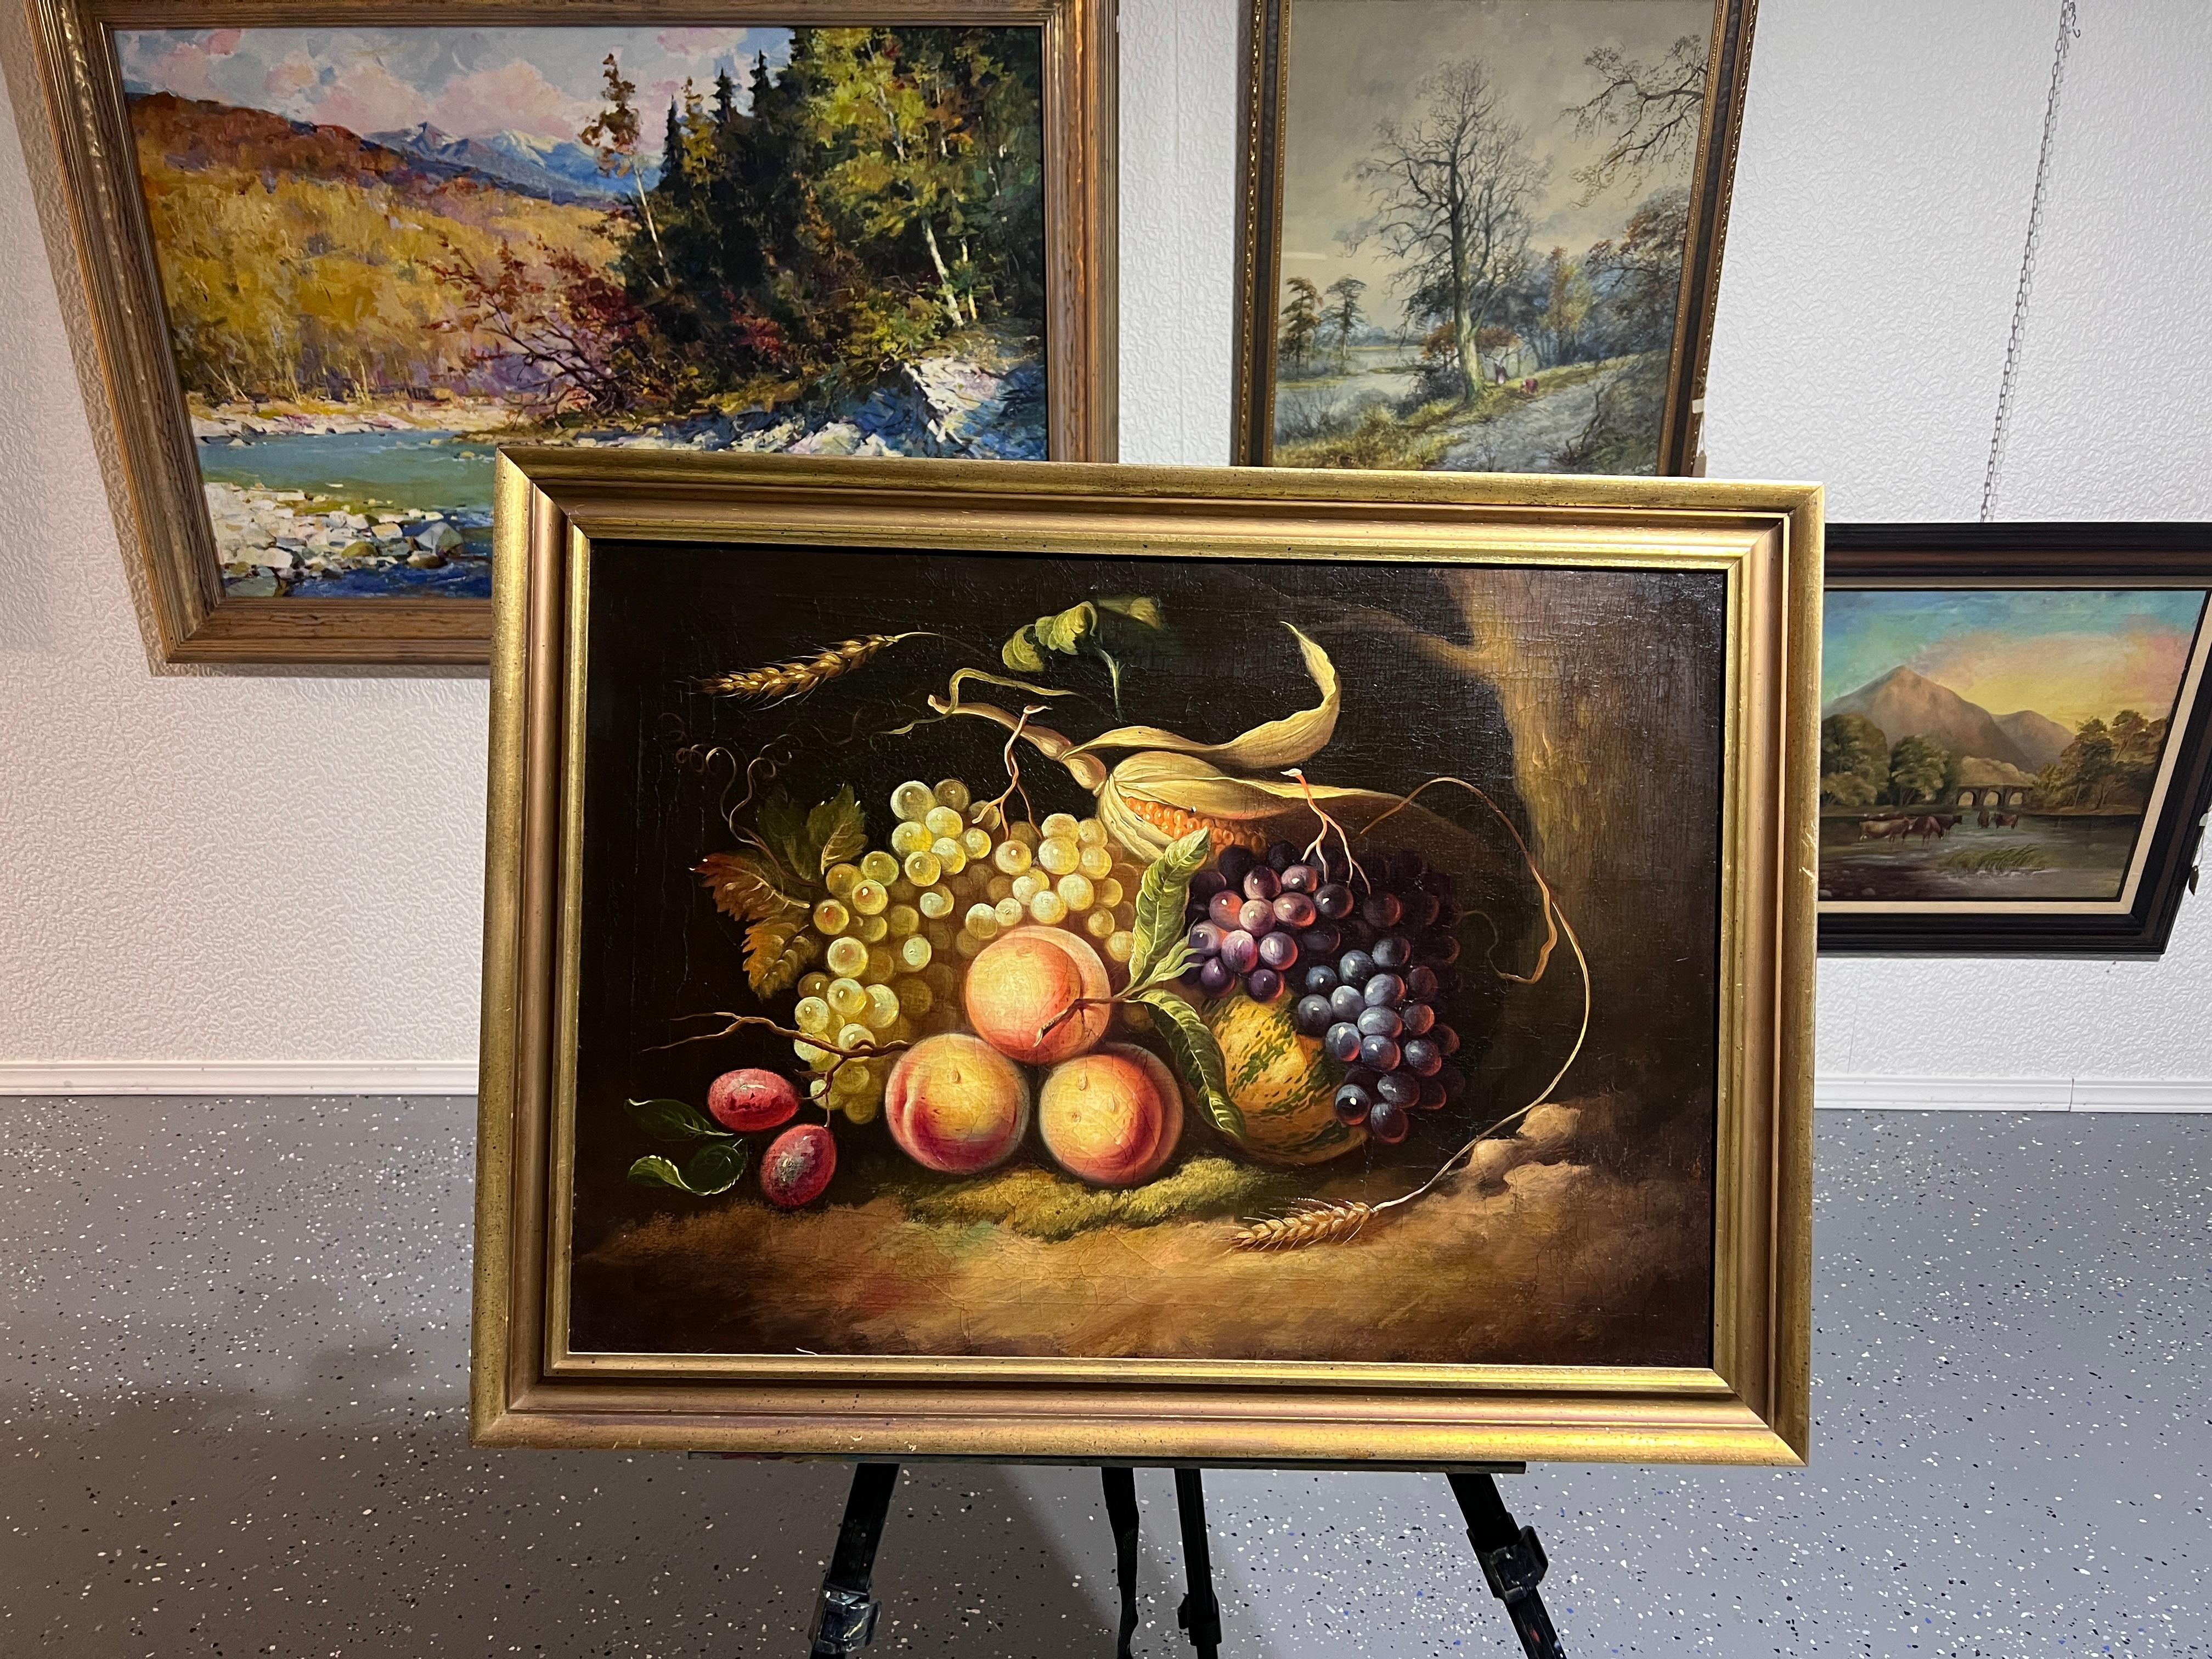 Up for sale is a beautiful original antique 19th-century oil painting on canvas. a still life with vibrant fruit and vegetables, including peaches, grapes, corn, and wheat, set on a mossy ground near a tree against a dark background.

Probably